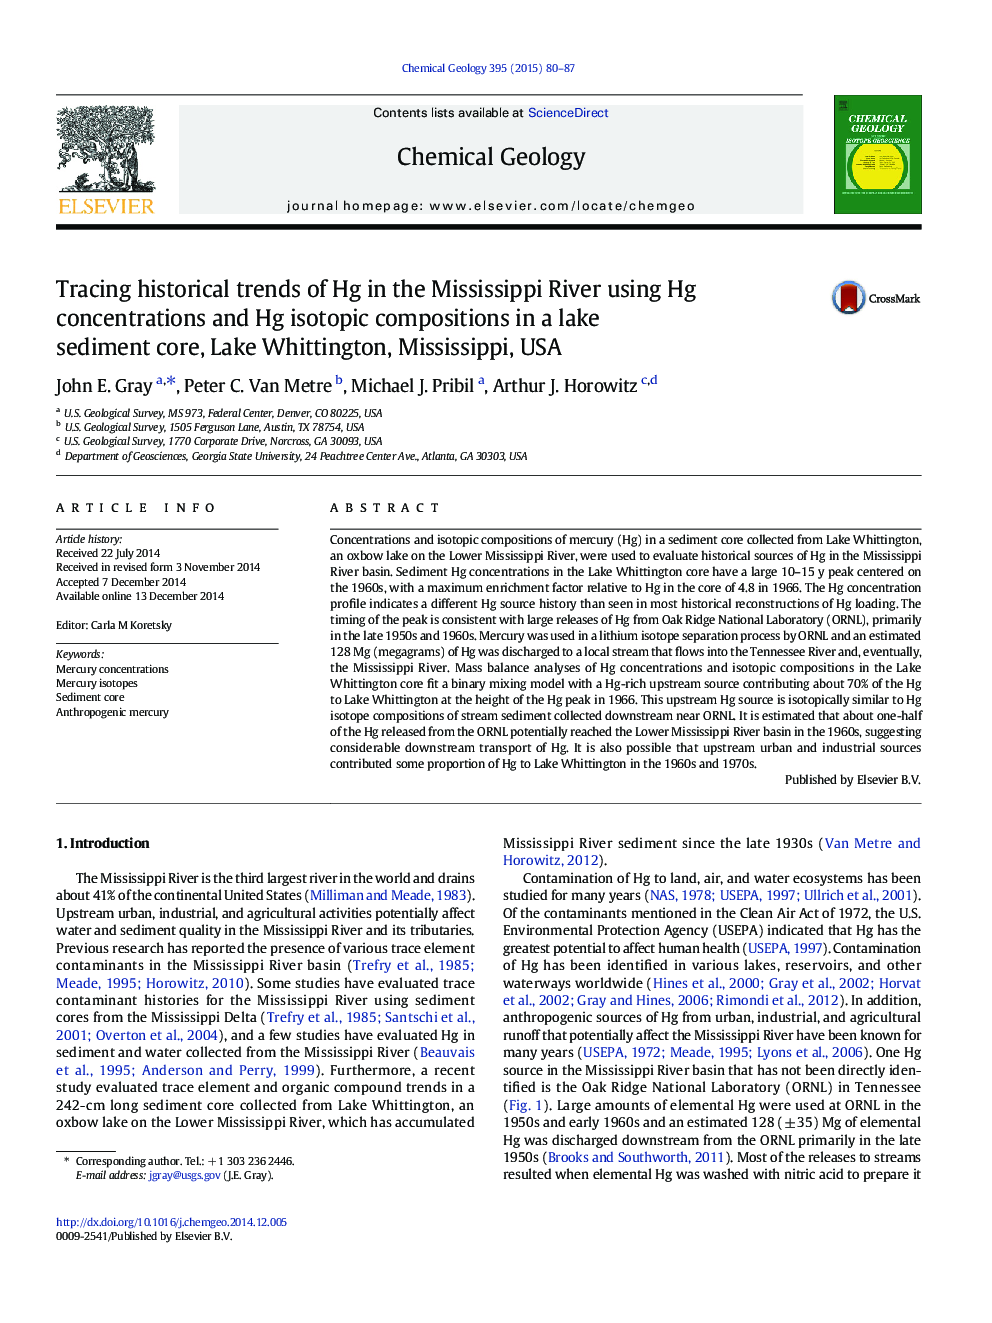 Tracing historical trends of Hg in the Mississippi River using Hg concentrations and Hg isotopic compositions in a lake sediment core, Lake Whittington, Mississippi, USA